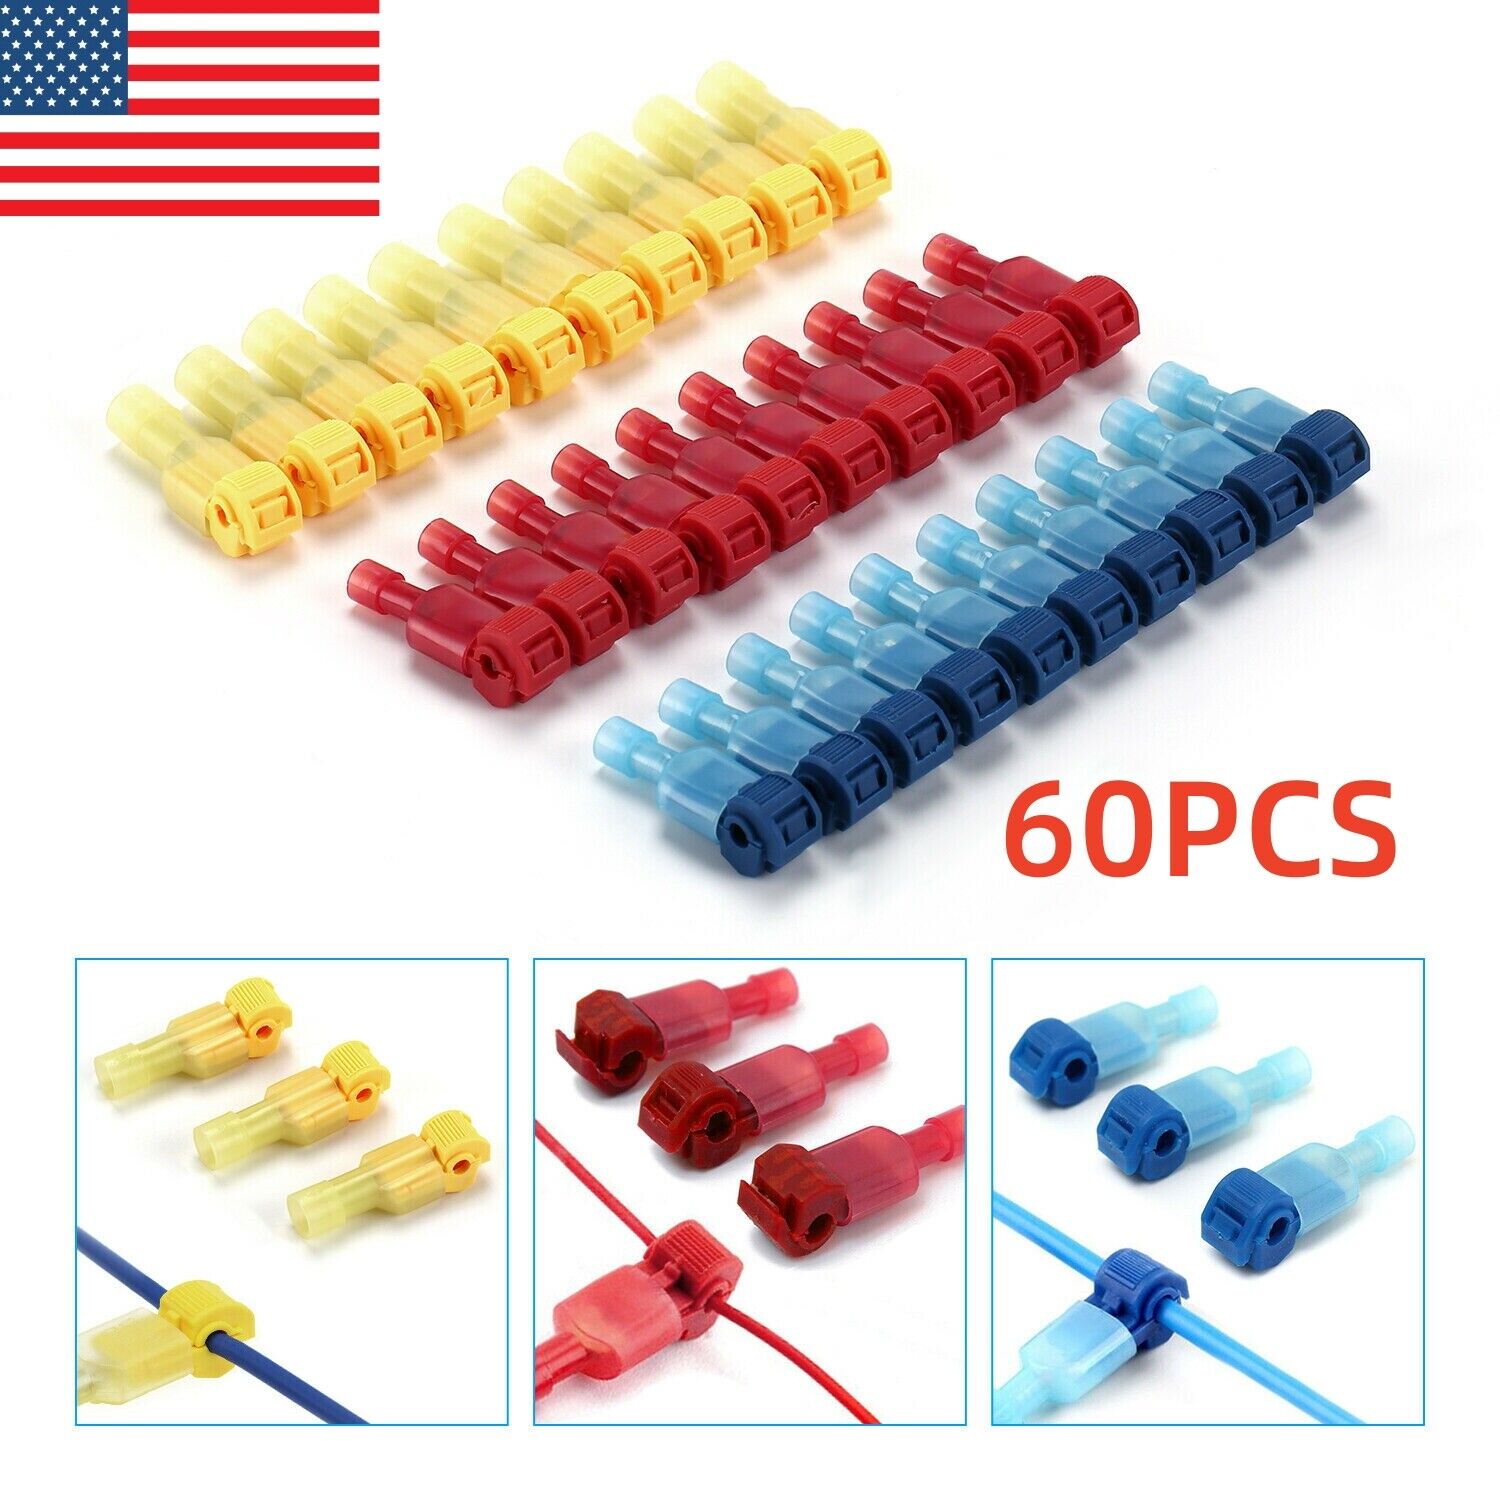 240/60Pcs T-Taps Wire Terminal Connectors Insulated 22-10 AWG Quick Splice Kit